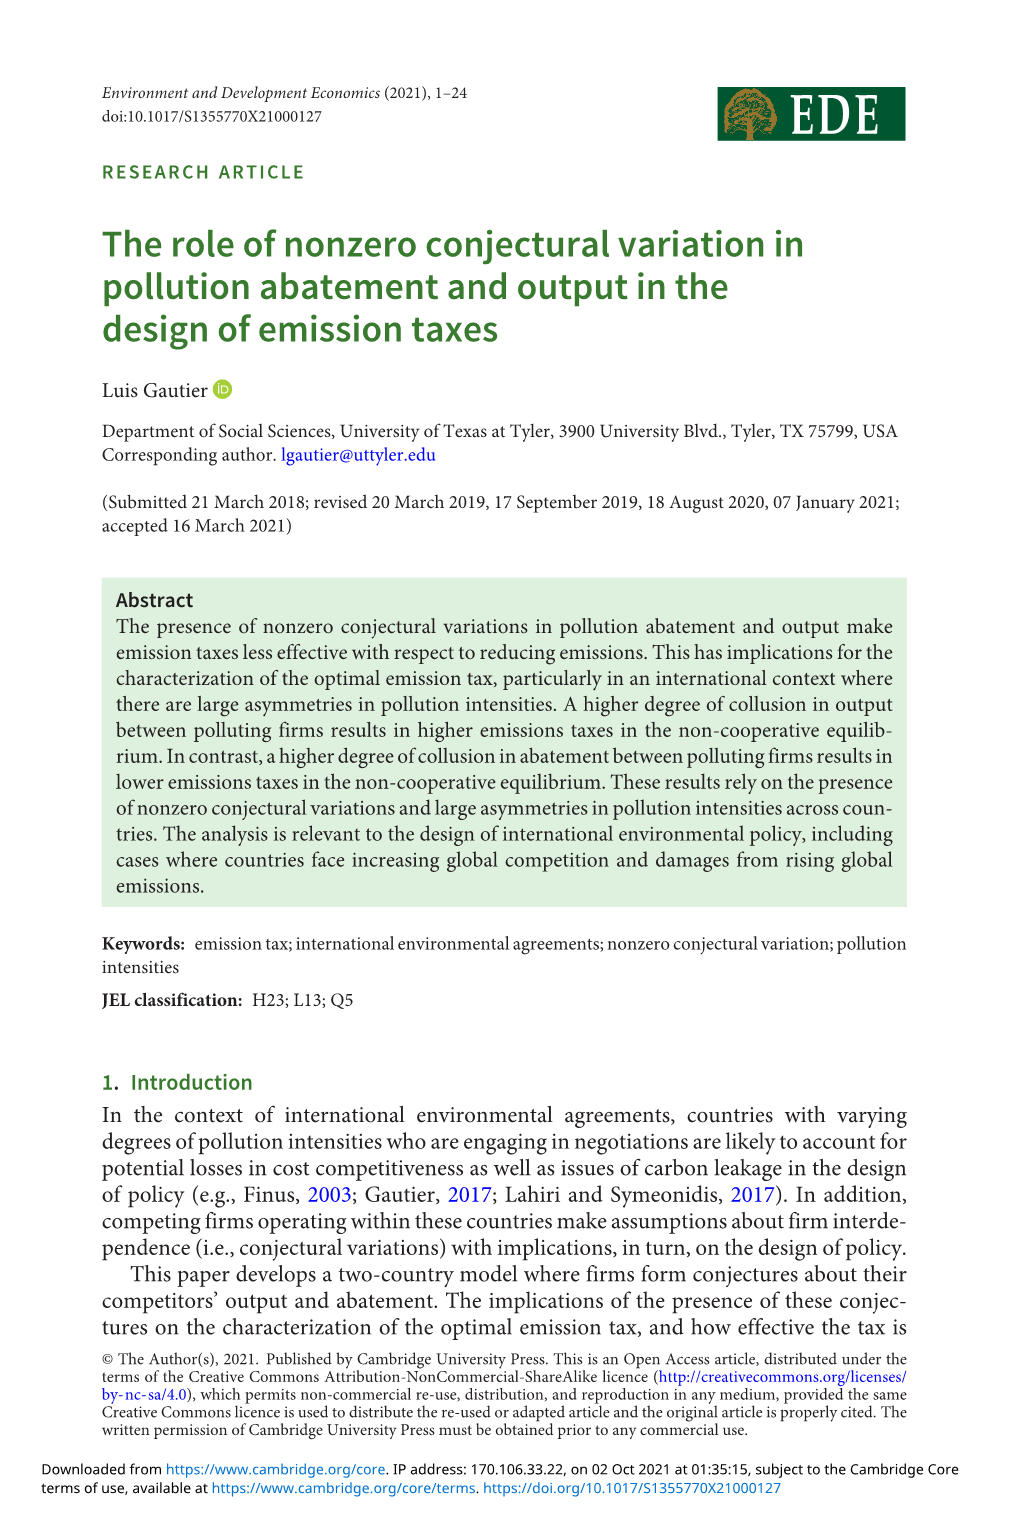 The Role of Nonzero Conjectural Variation in Pollution Abatement and Output in the Design of Emission Taxes